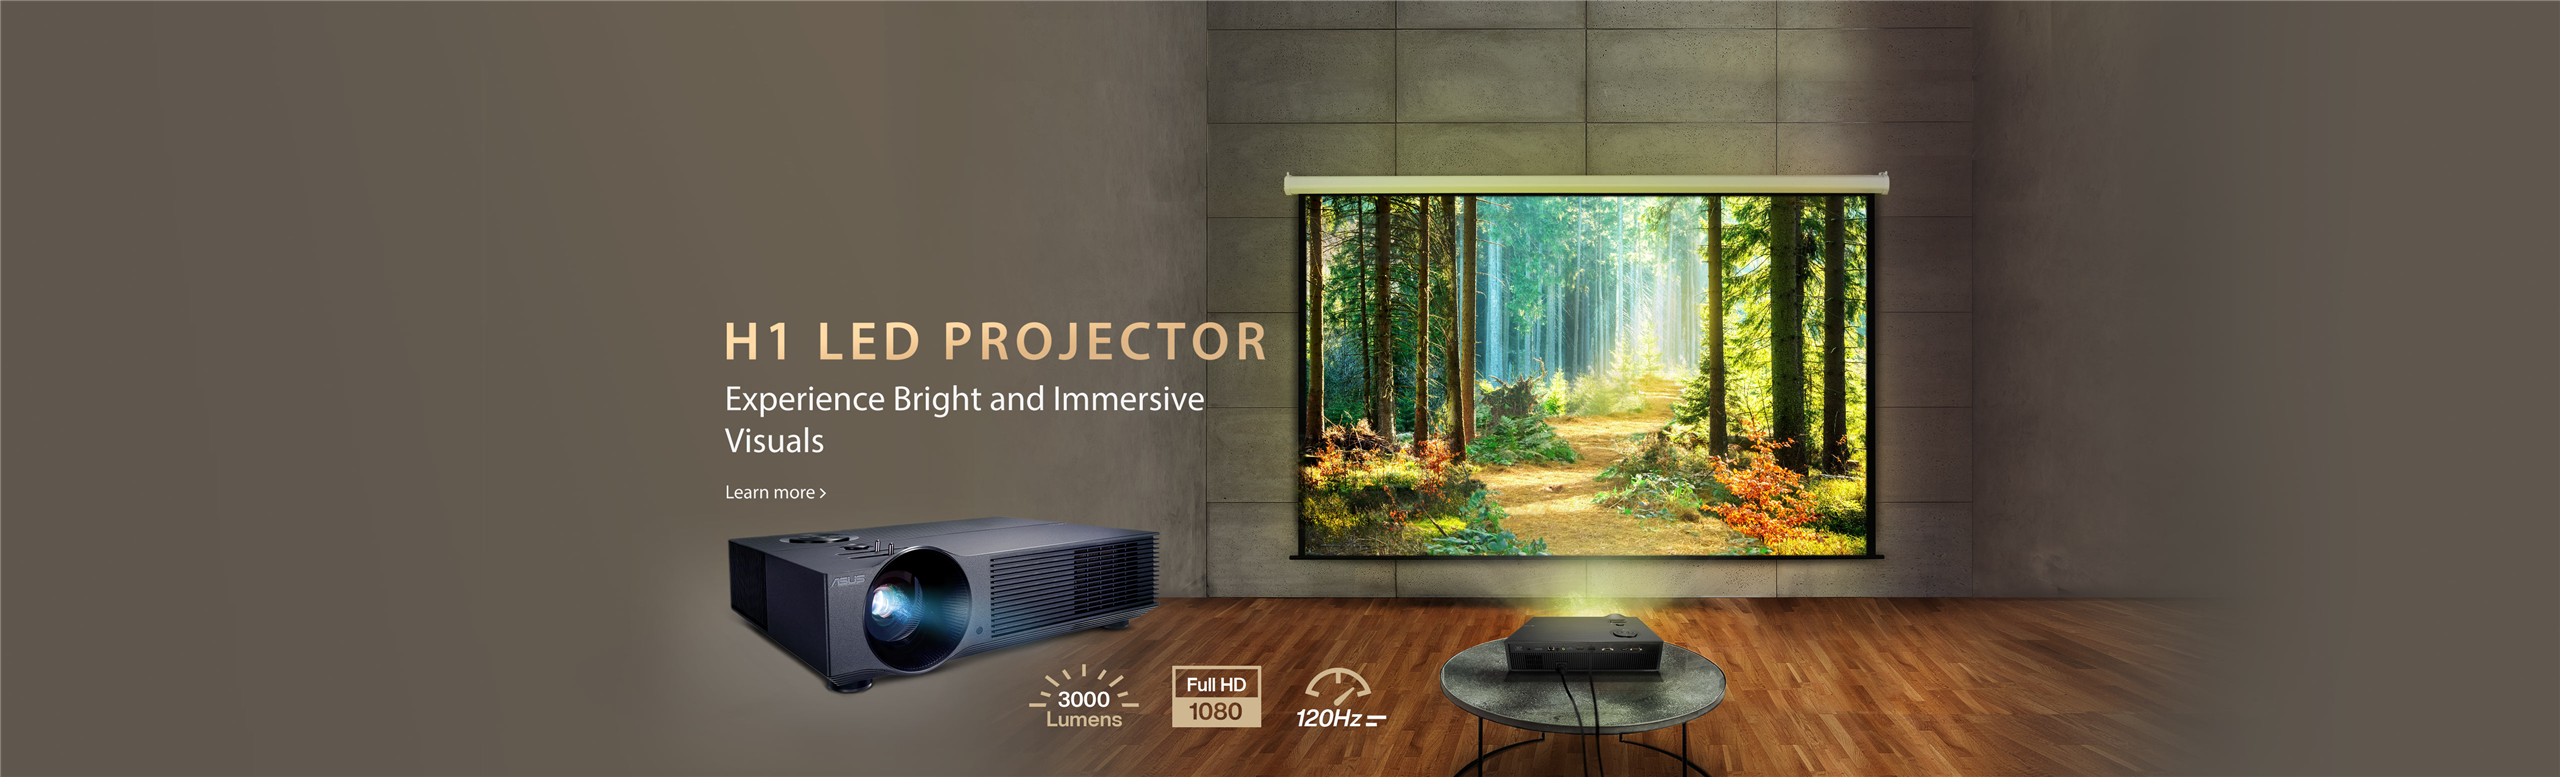 ASUS H1 Projector